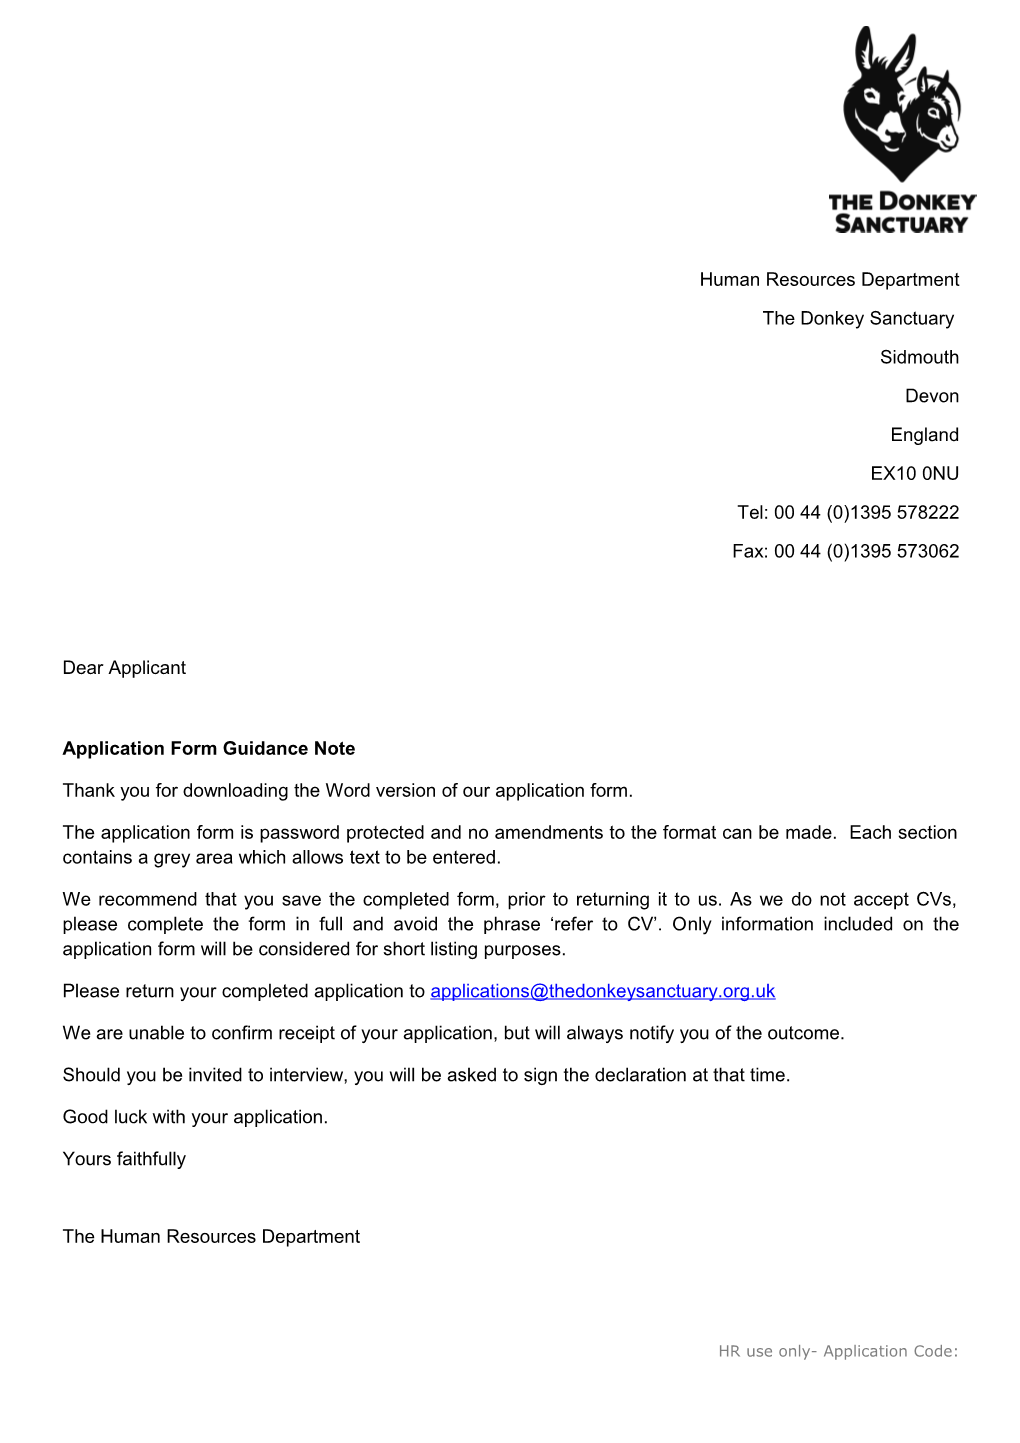 Application Form Guidance Note s1